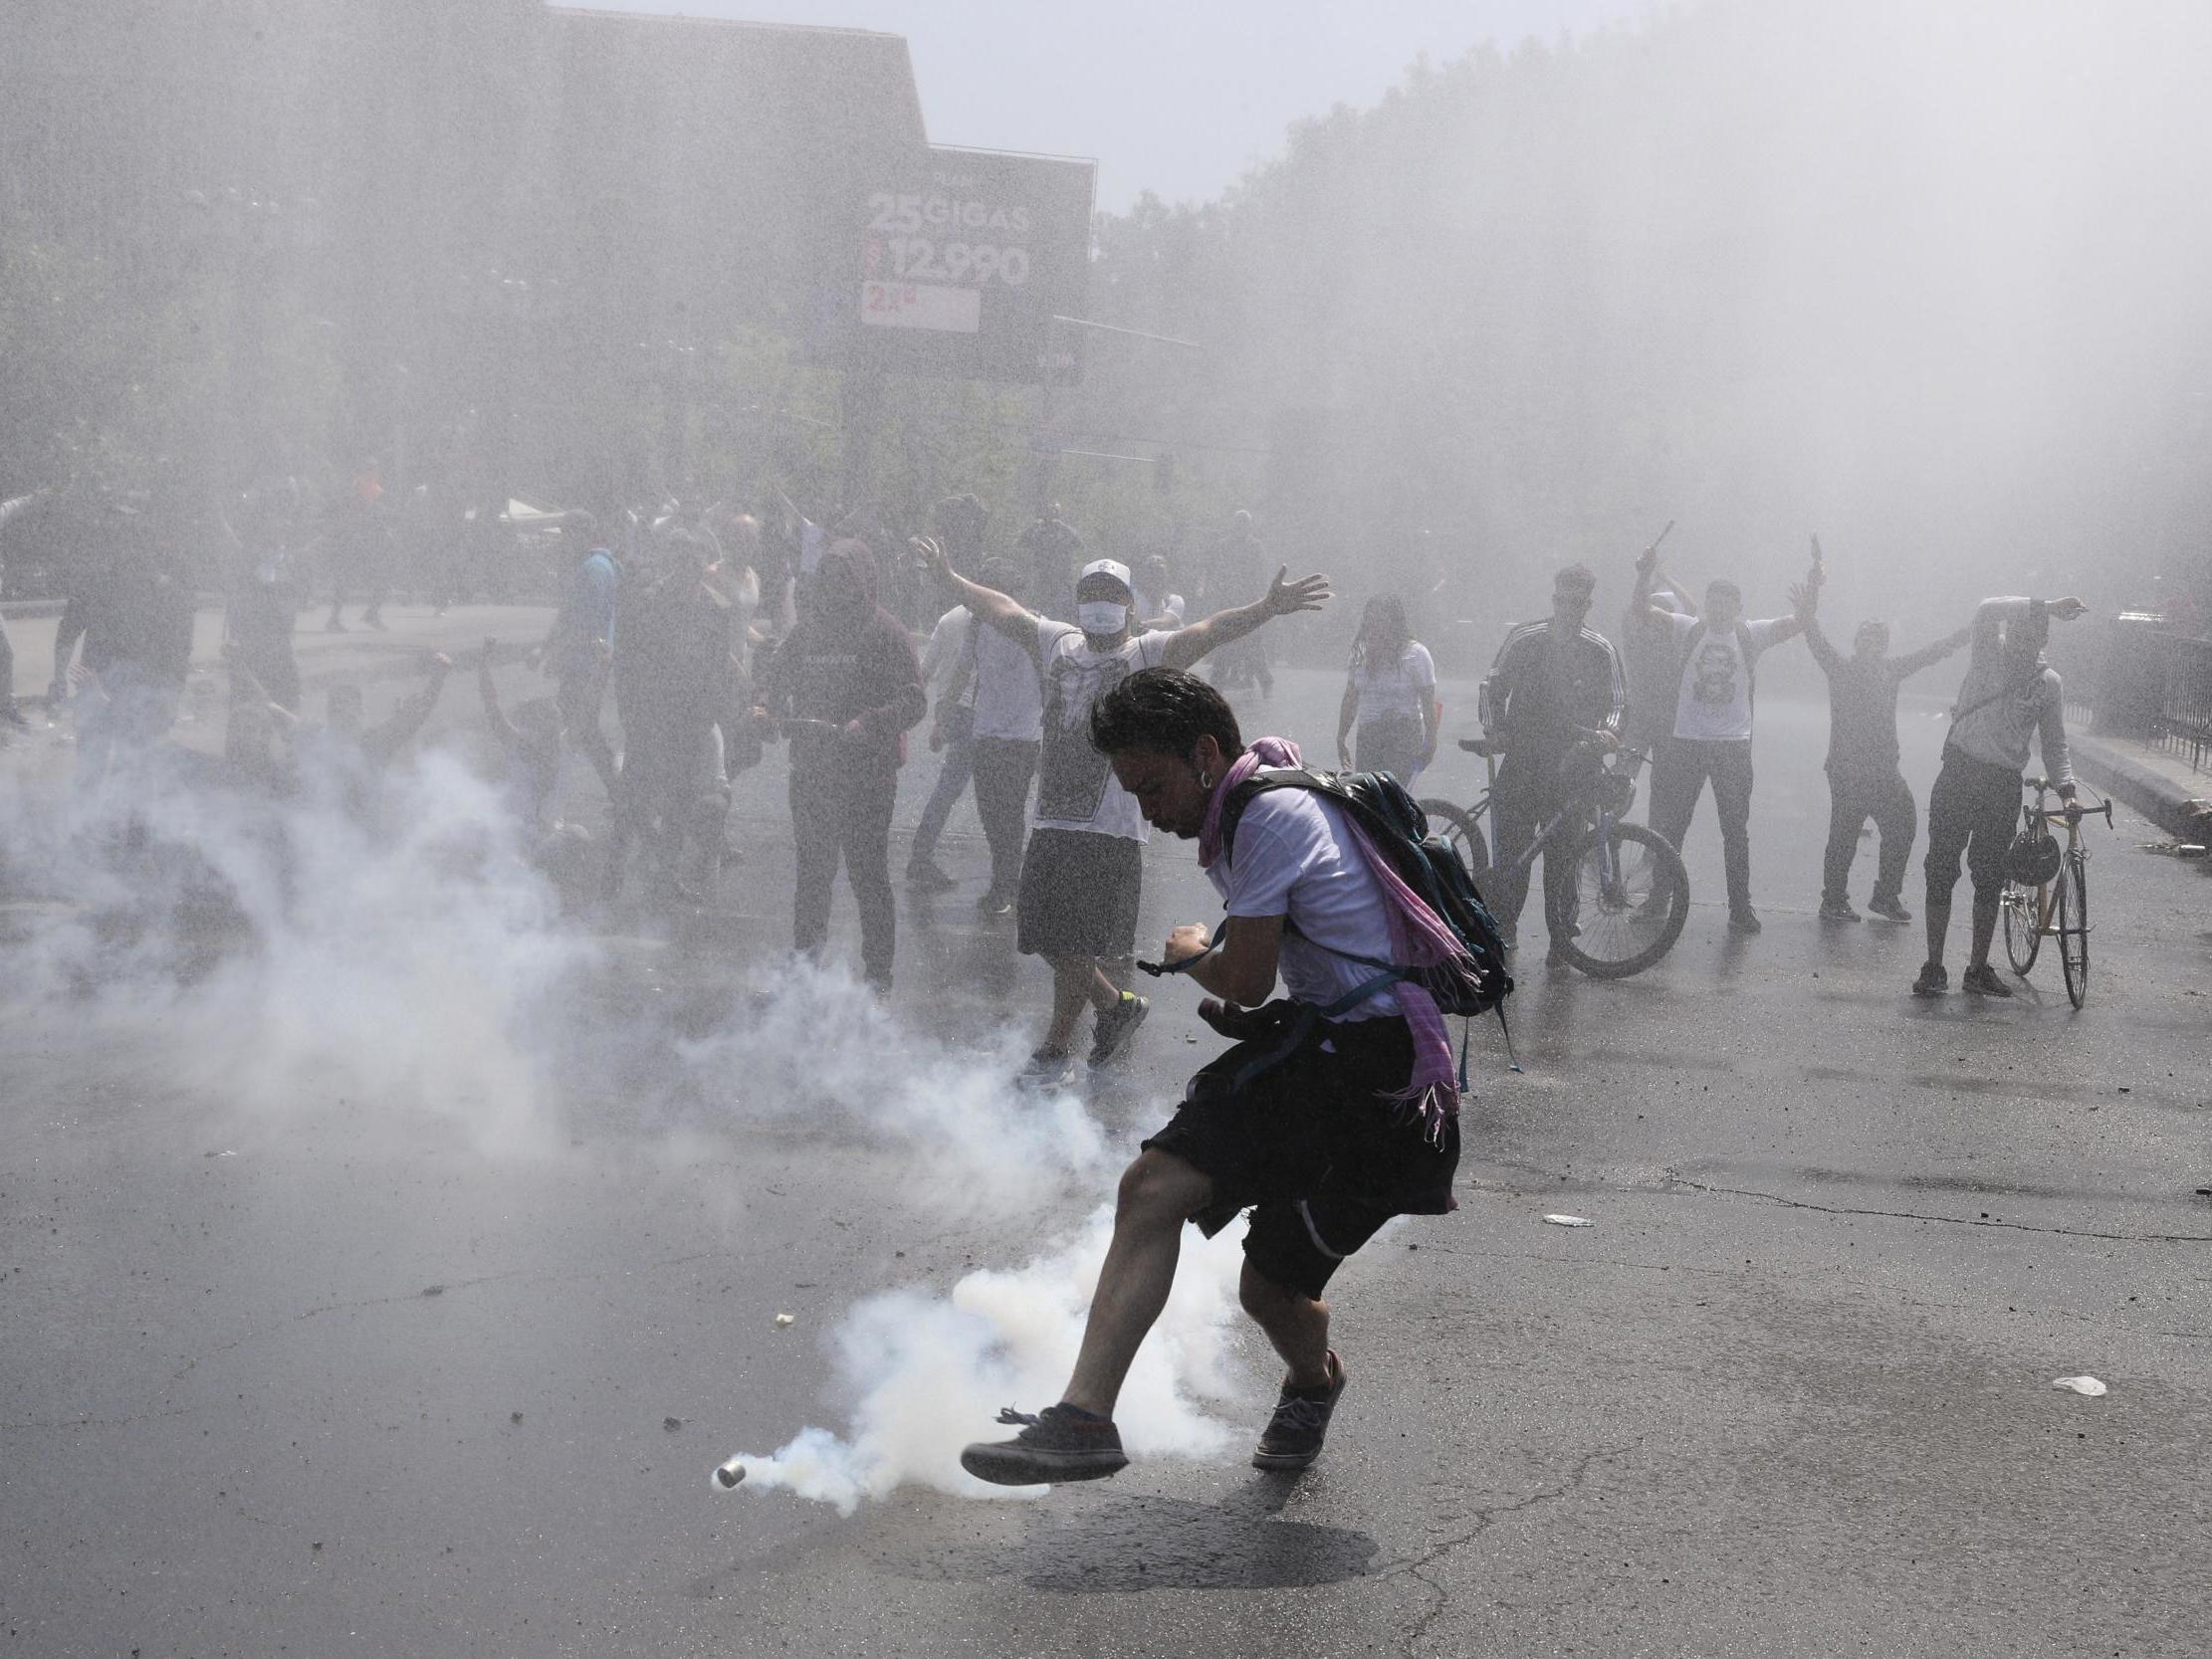 A protester kicks a tear gas canister during clashes in Santiago